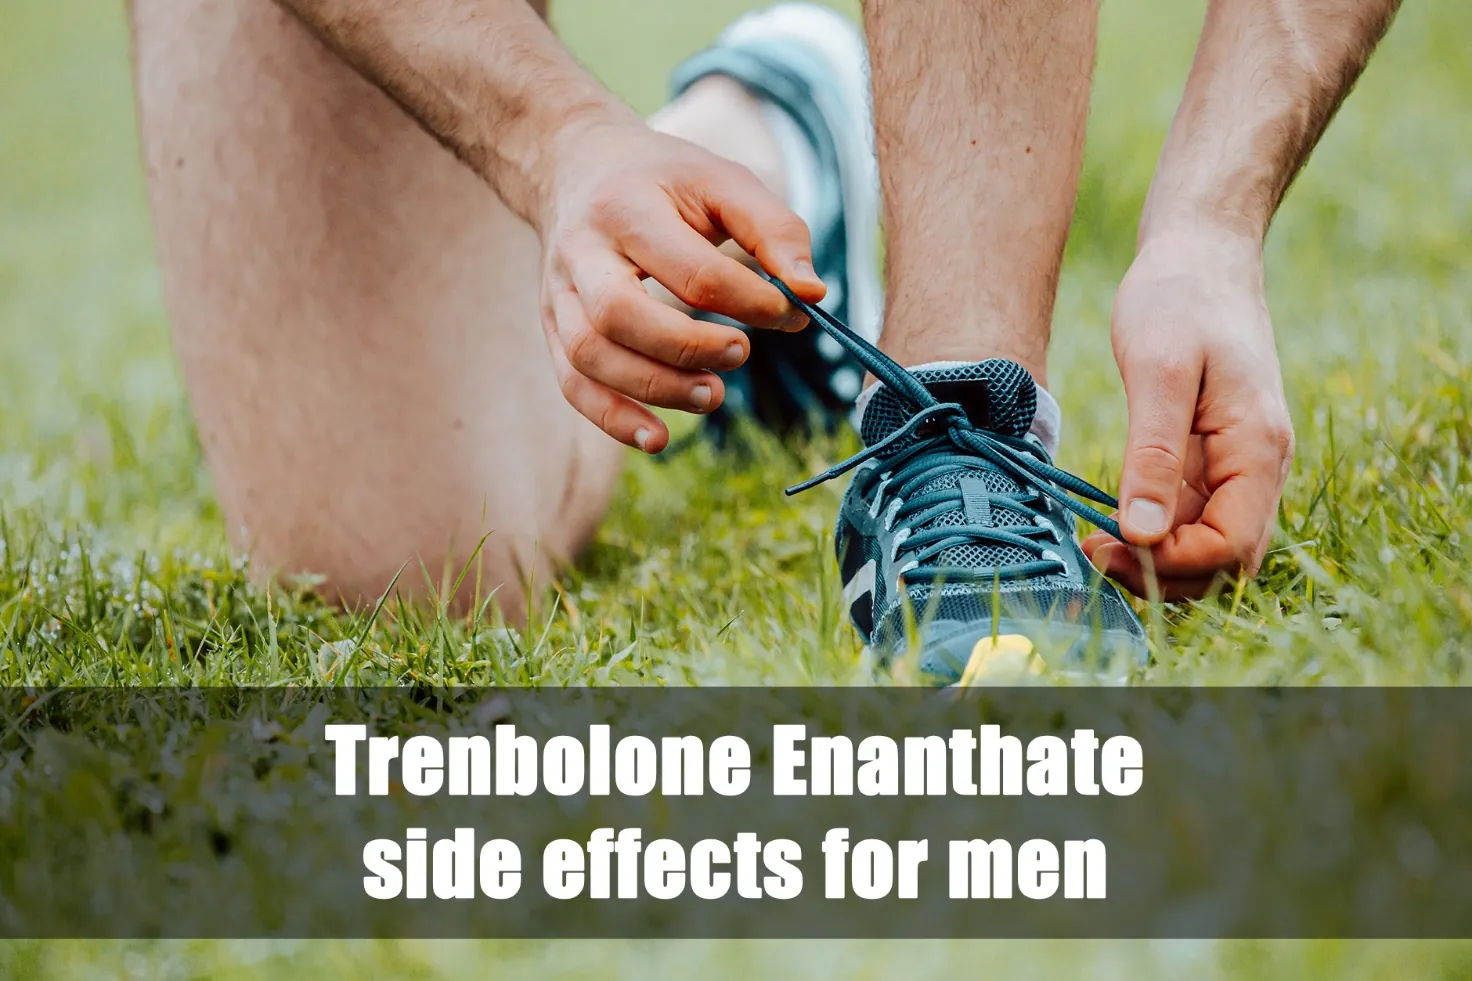 Trenbolone Enanthate side effects for men